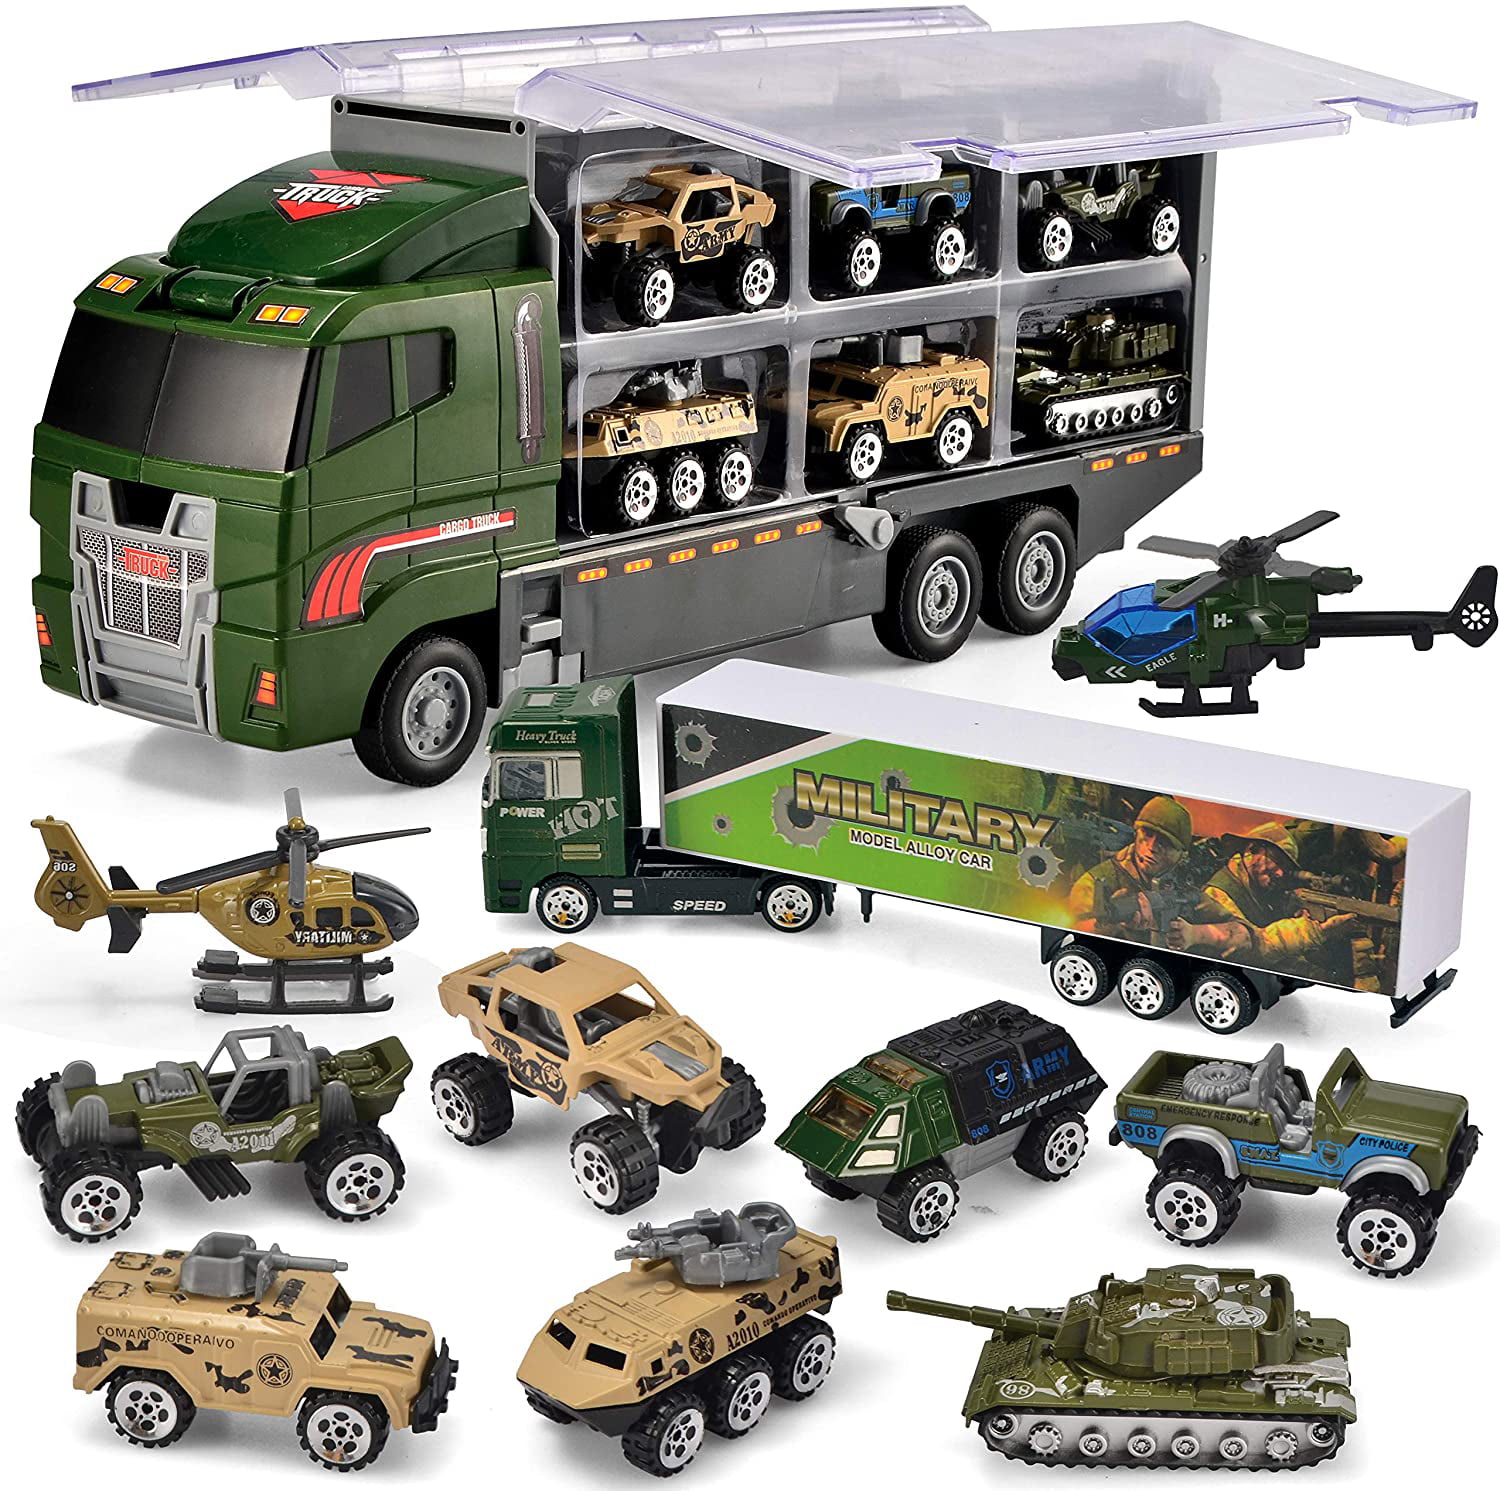 Details about   Jenilily Army Toys Cars For Boys Tank Military Truck Vehicle Mini Carrier Set 11 